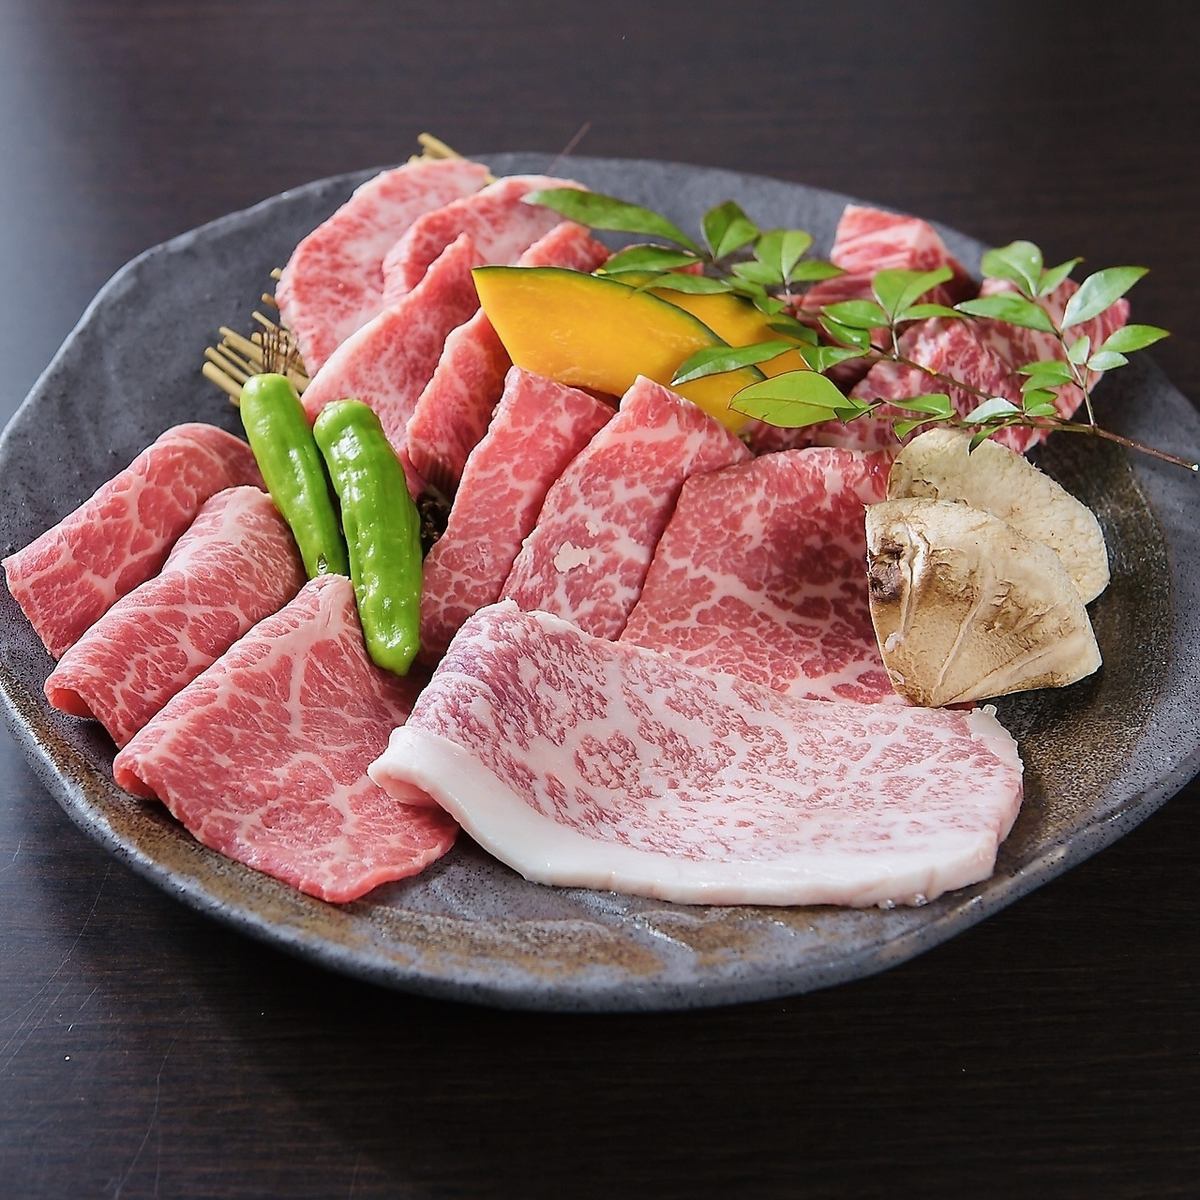 Meat cakes and message plates can be prepared by prior arrangement.◎